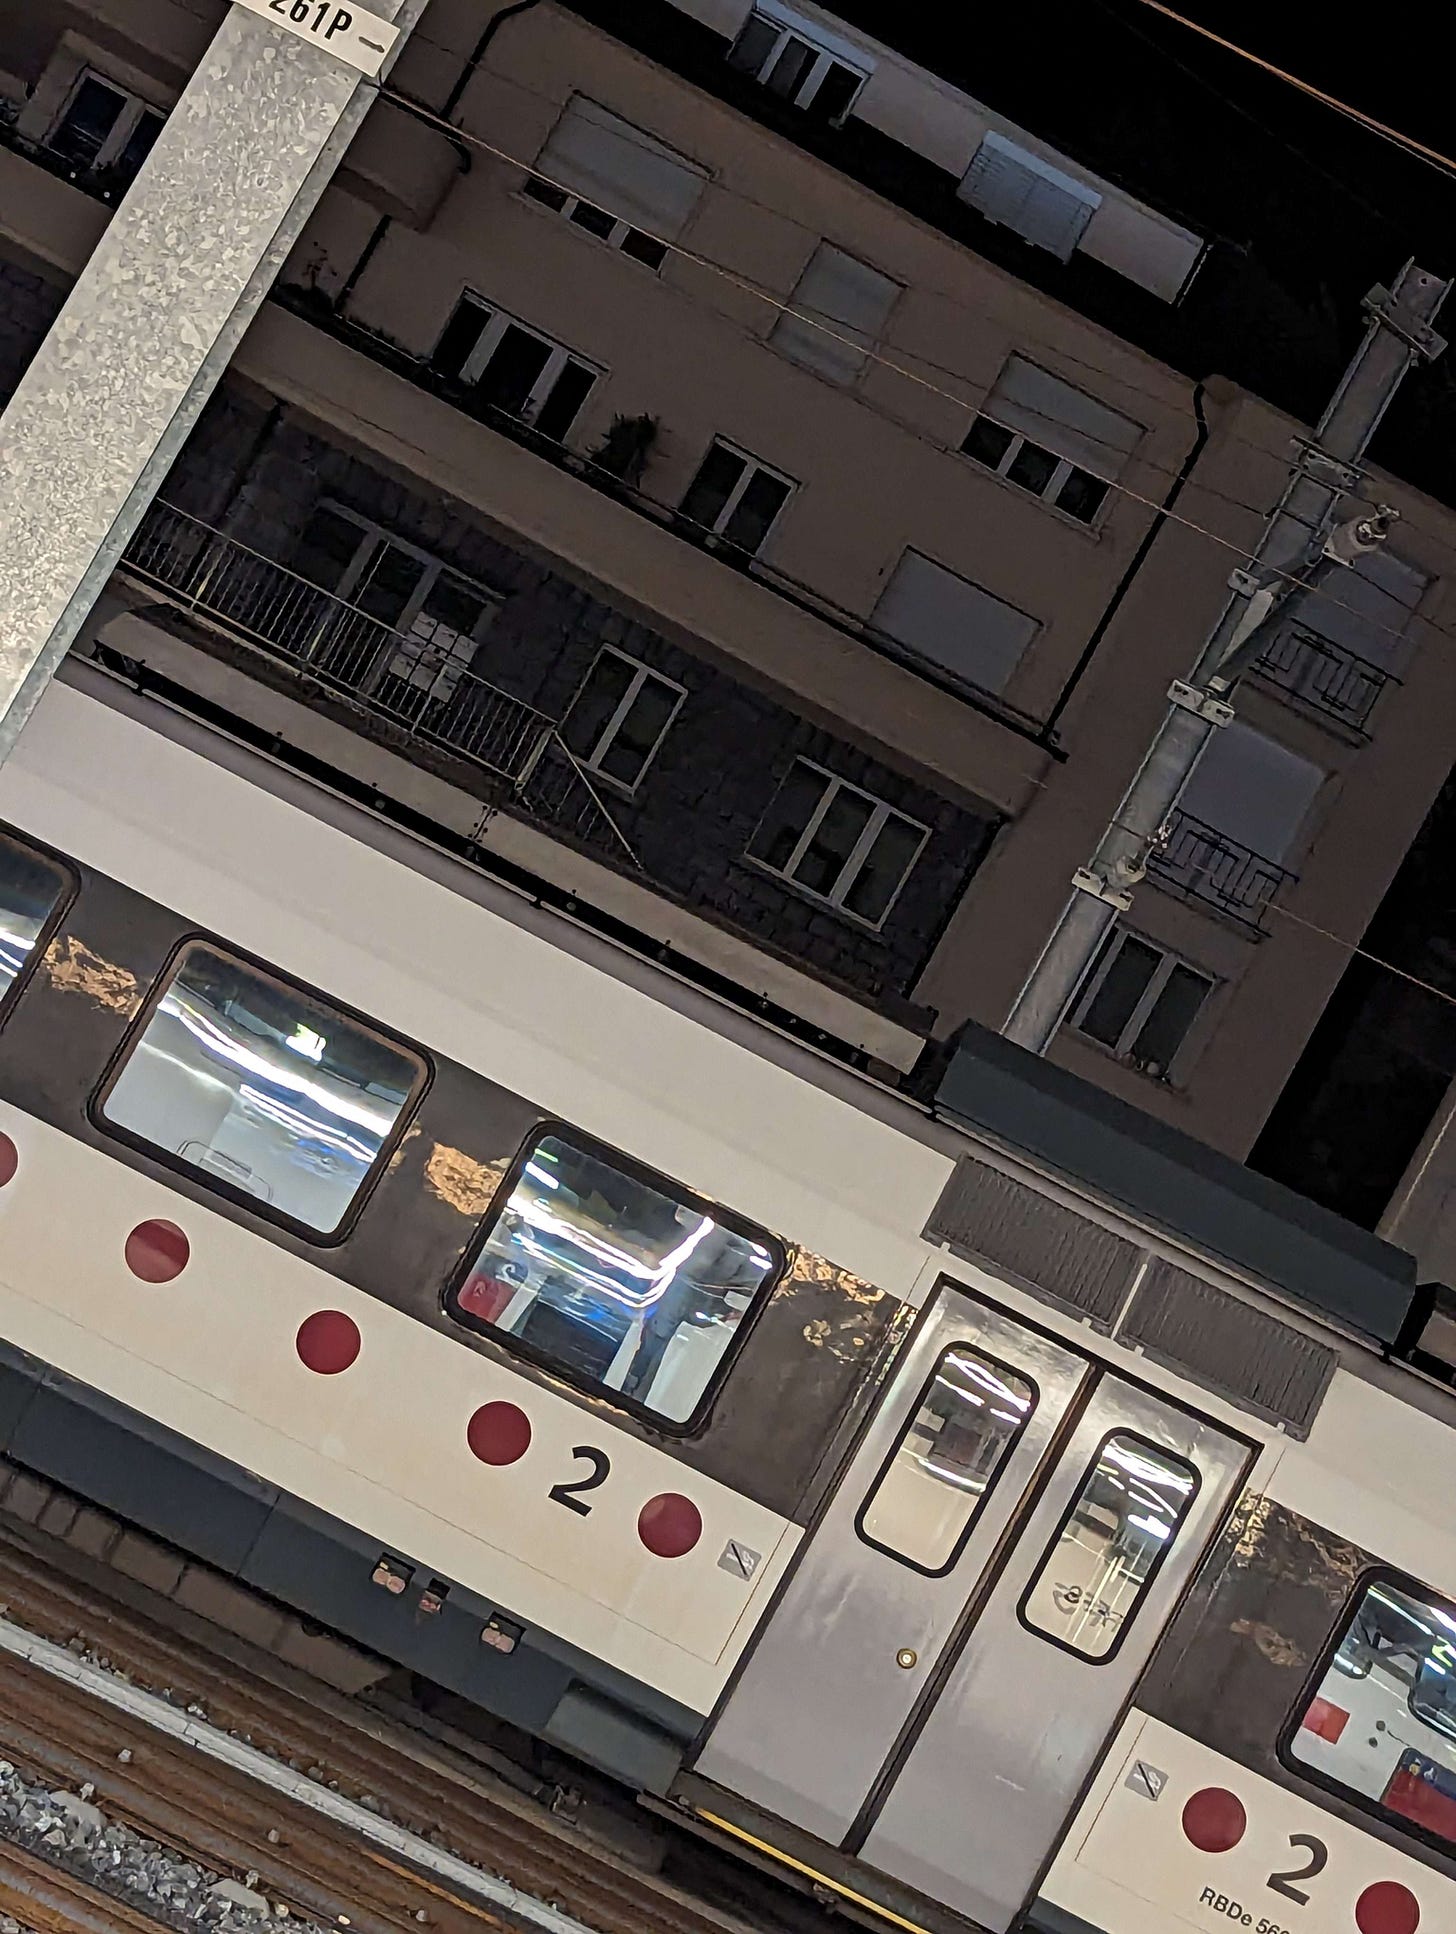 A white train with red dots lining its side sits on train tracks in front of a beige residential building.